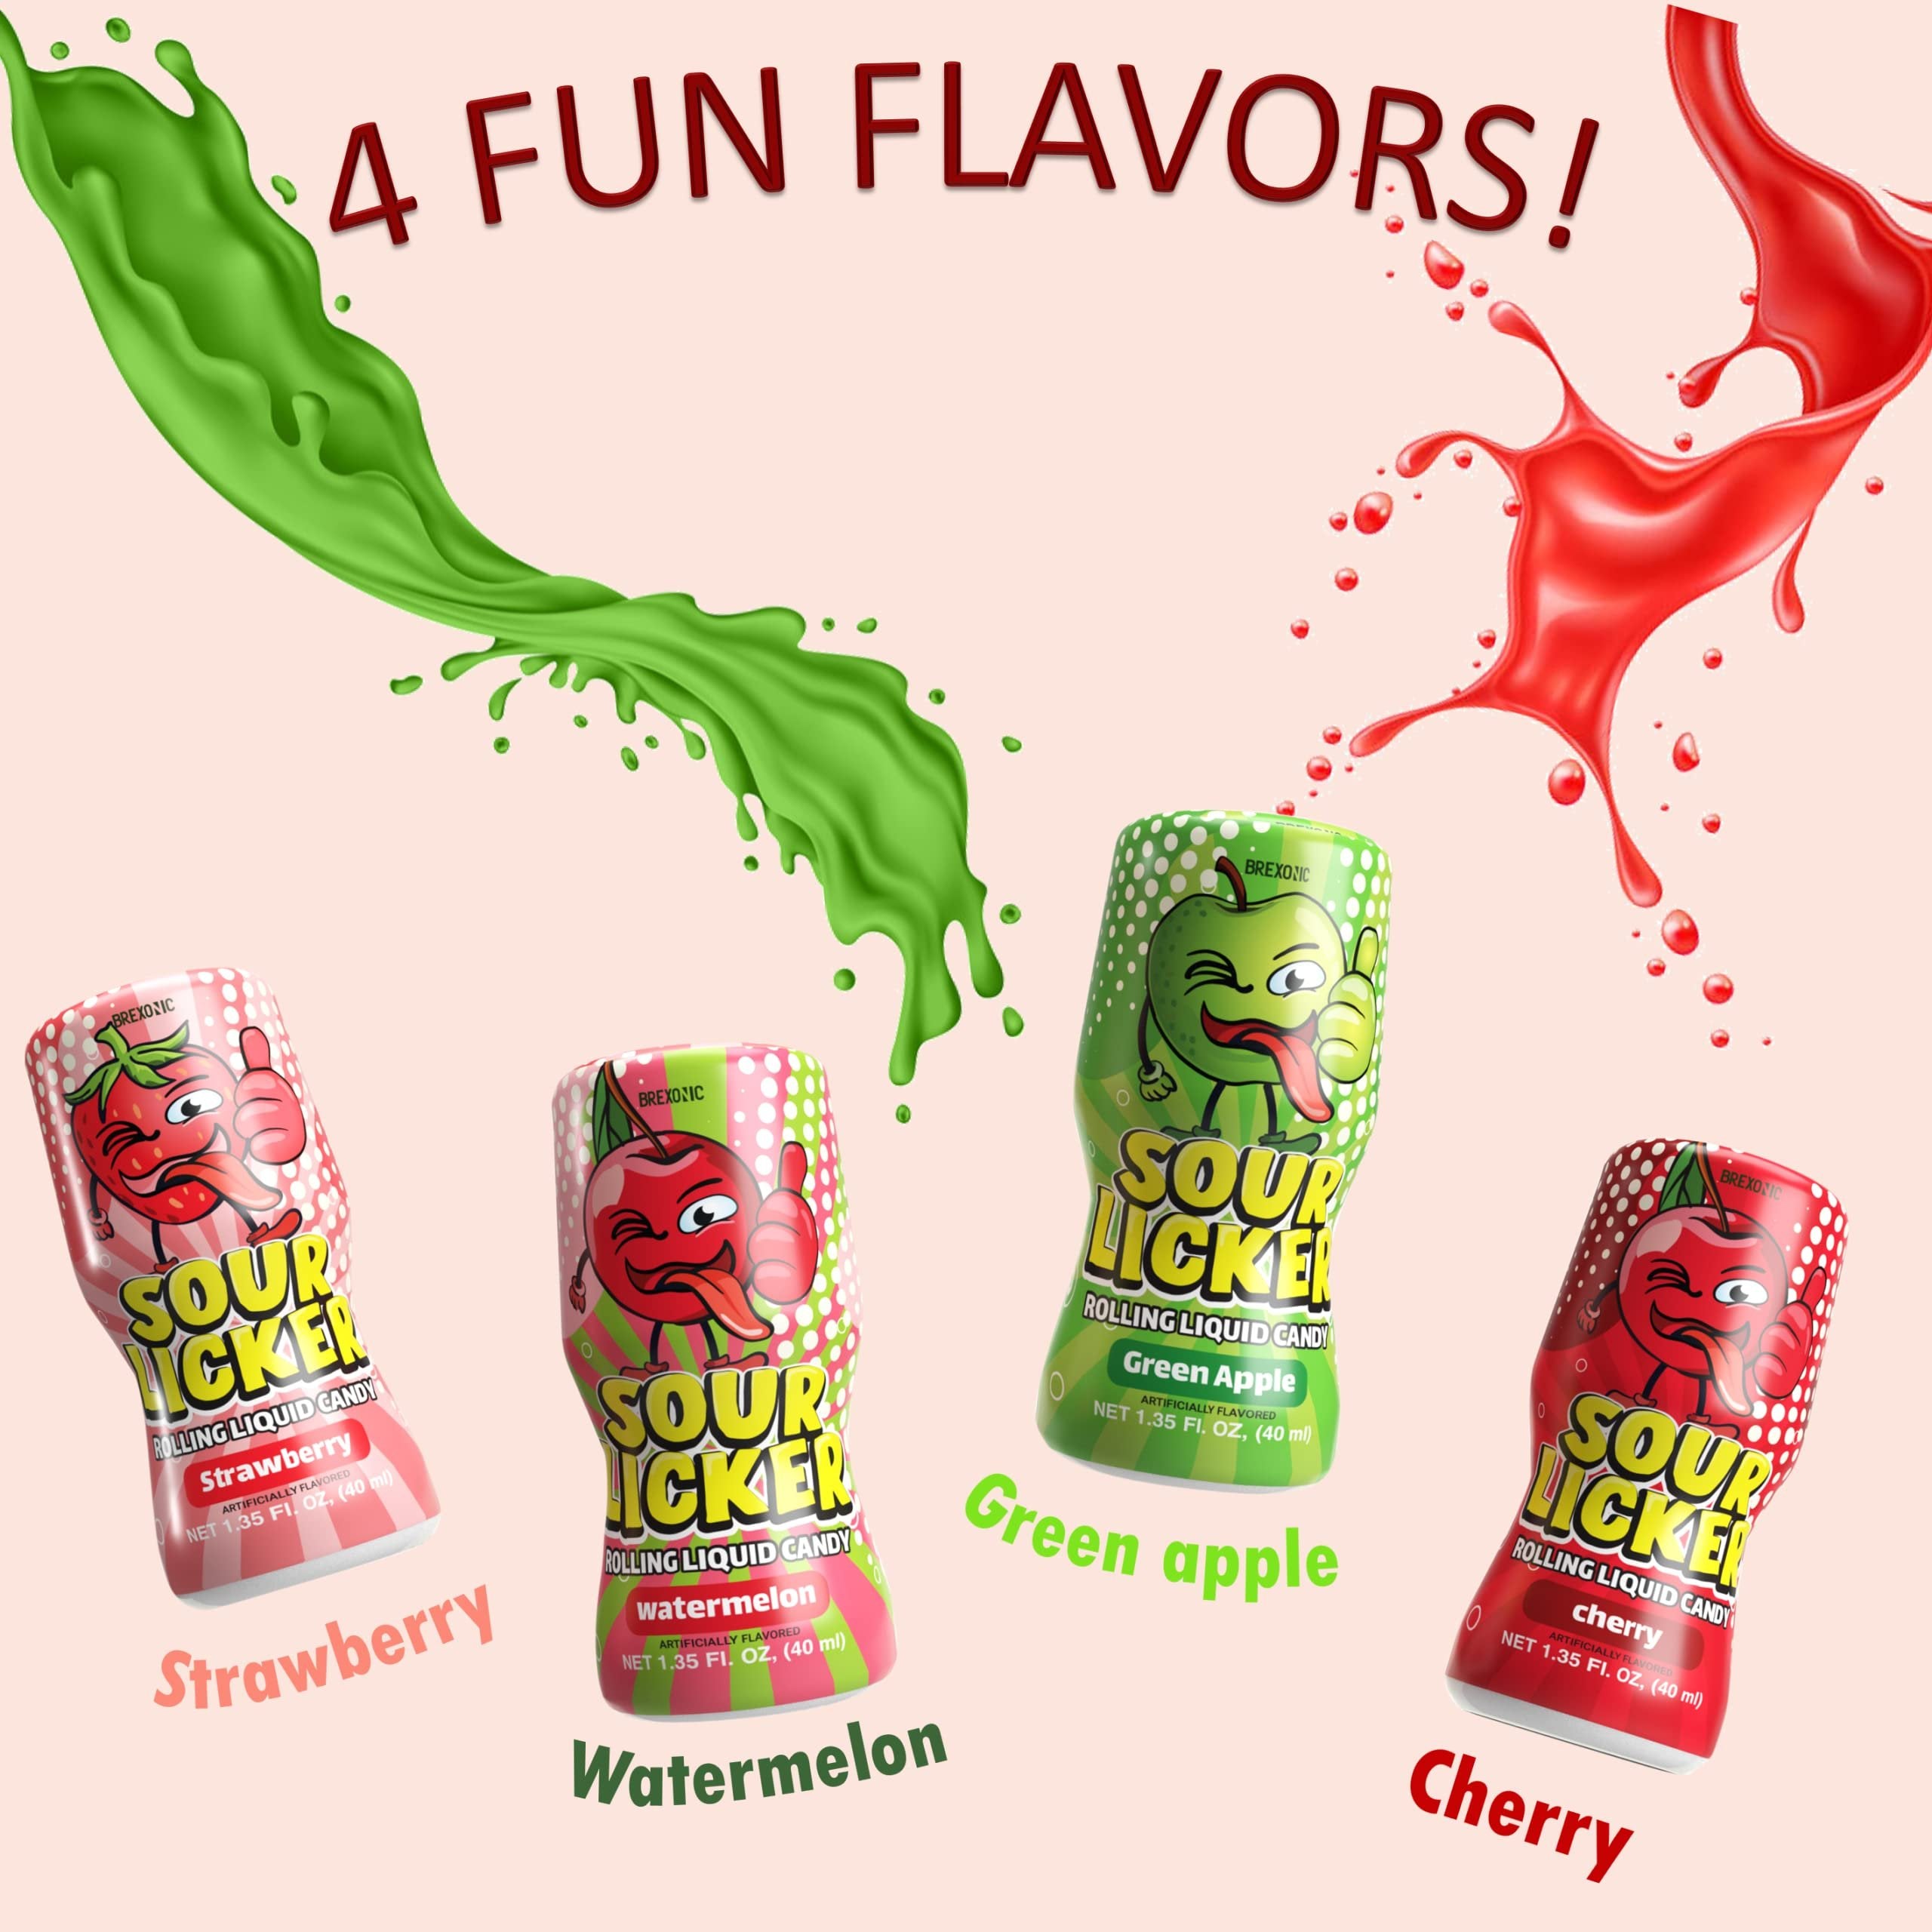 Slime Sour Lickers Candy, Gluten Free, 12 Pk Of 4 Flavors, Watermelon, Green Apple, Cherry and Strawberry Rolling Liquid Candy Bulk, Treat for Parties, Birthdays, or Halloween Treat (12)